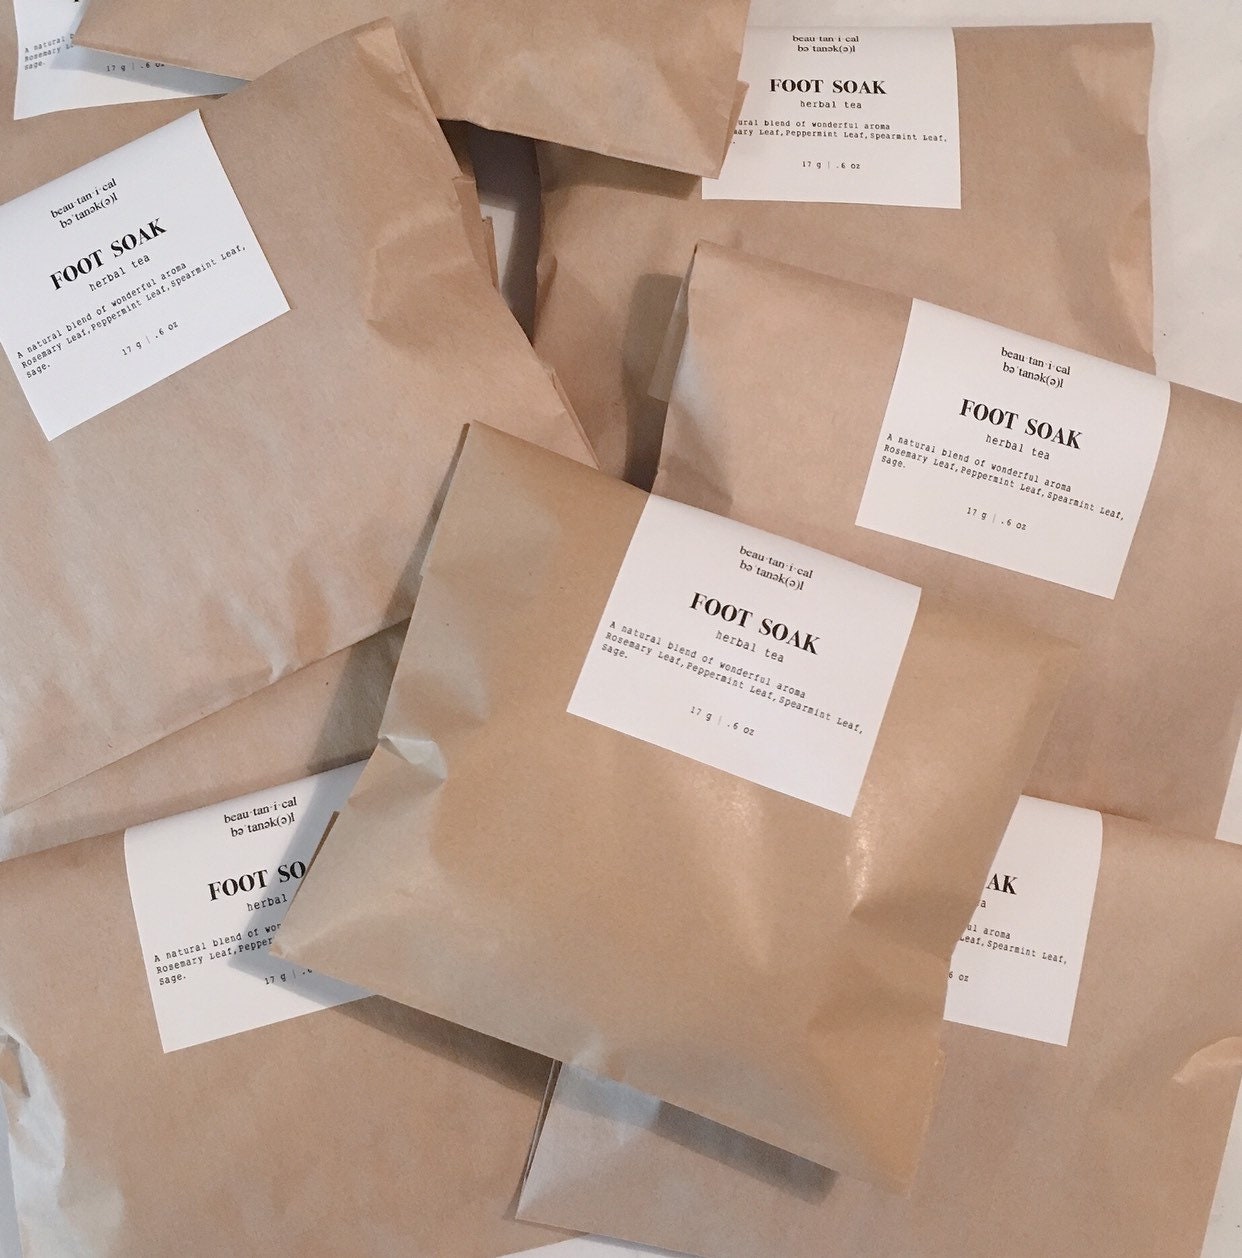 3 Bags Of Foot Soak Herbals Tea Blend | Manicure + Pedicure Relaxation